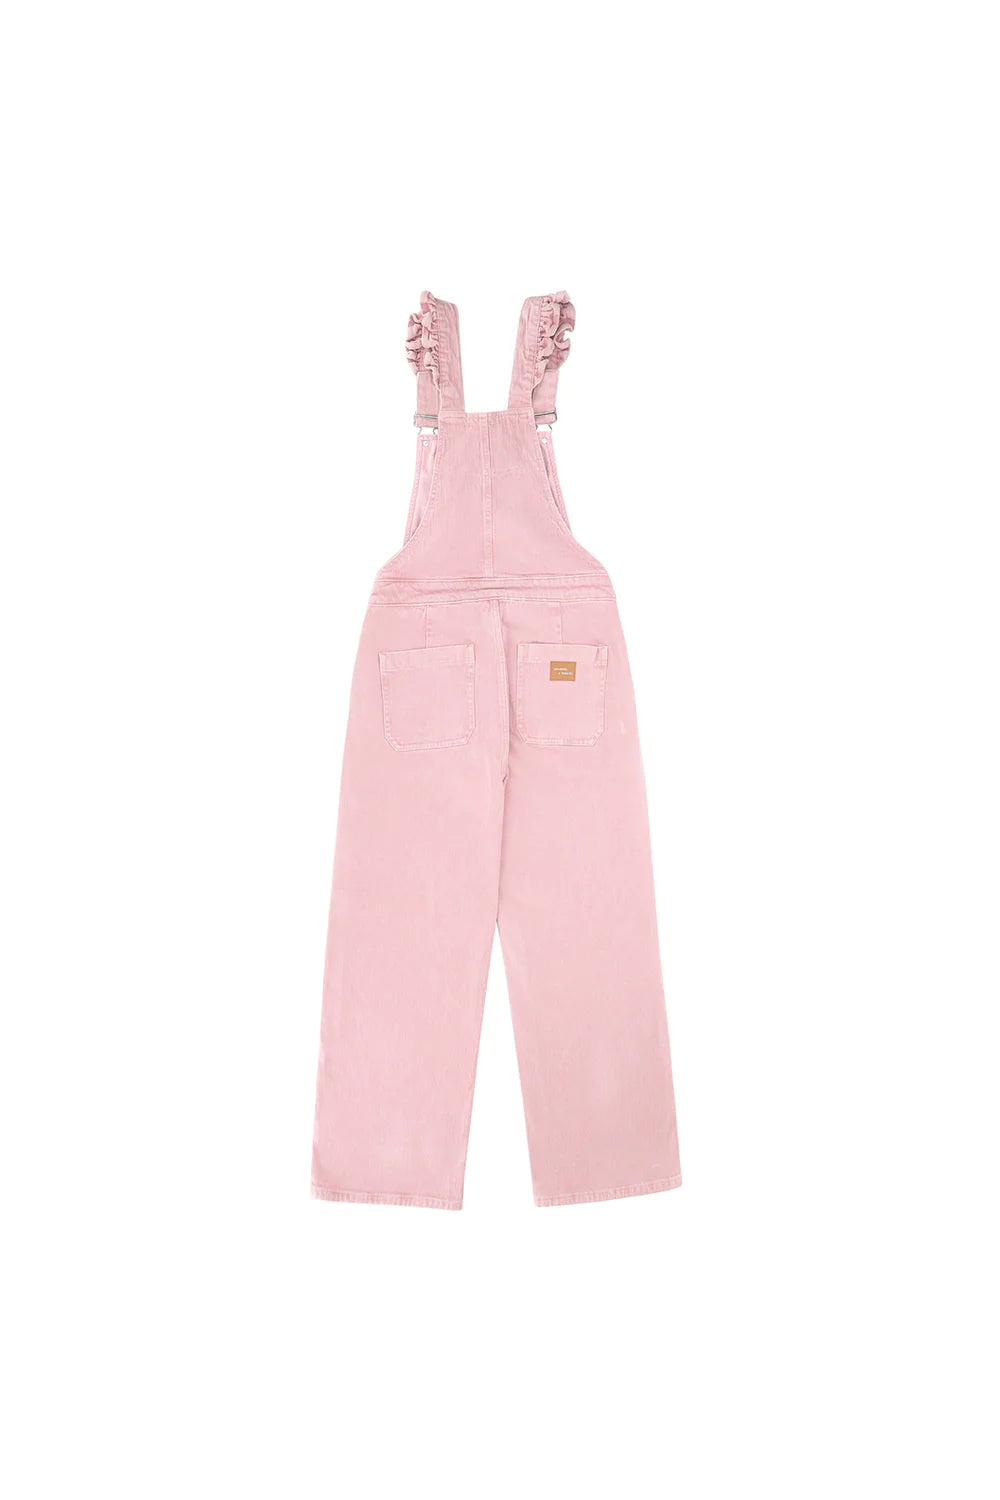 Elodie Frill Dungaree - Dusty Rose